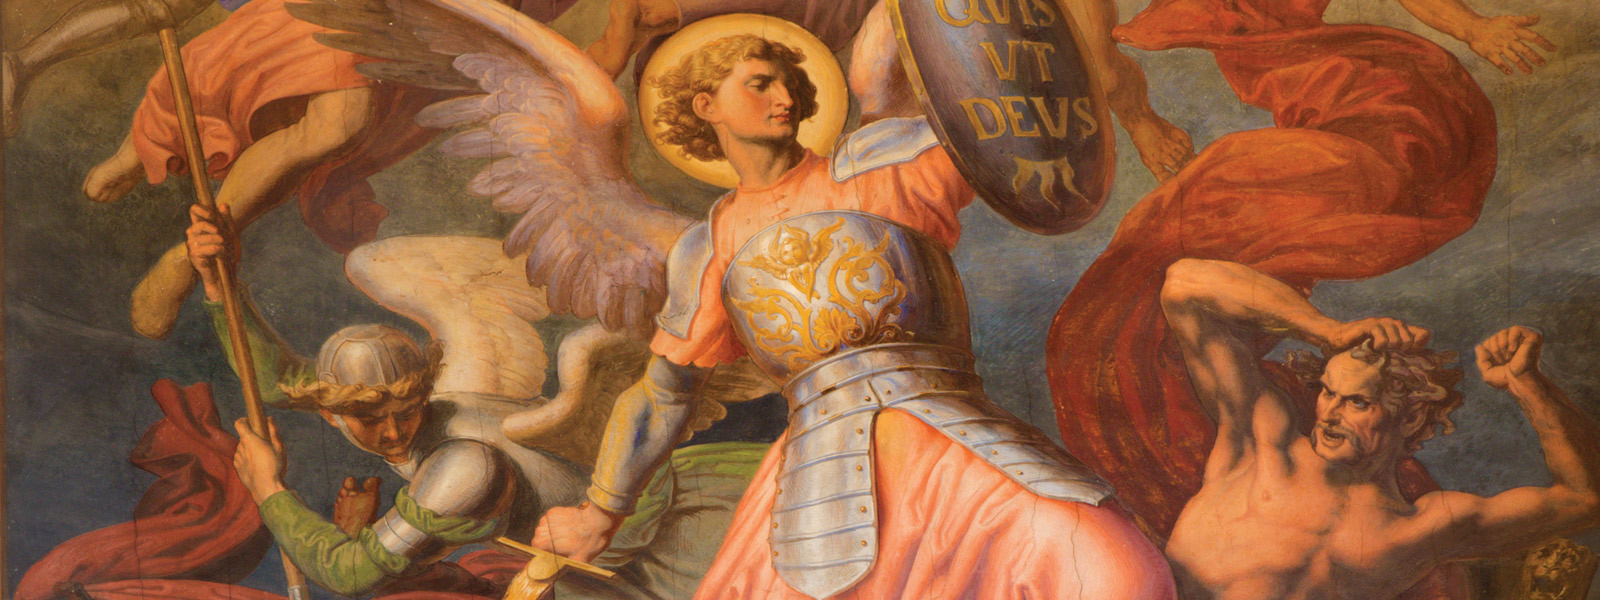 Painting of angel fighting with sword and shield